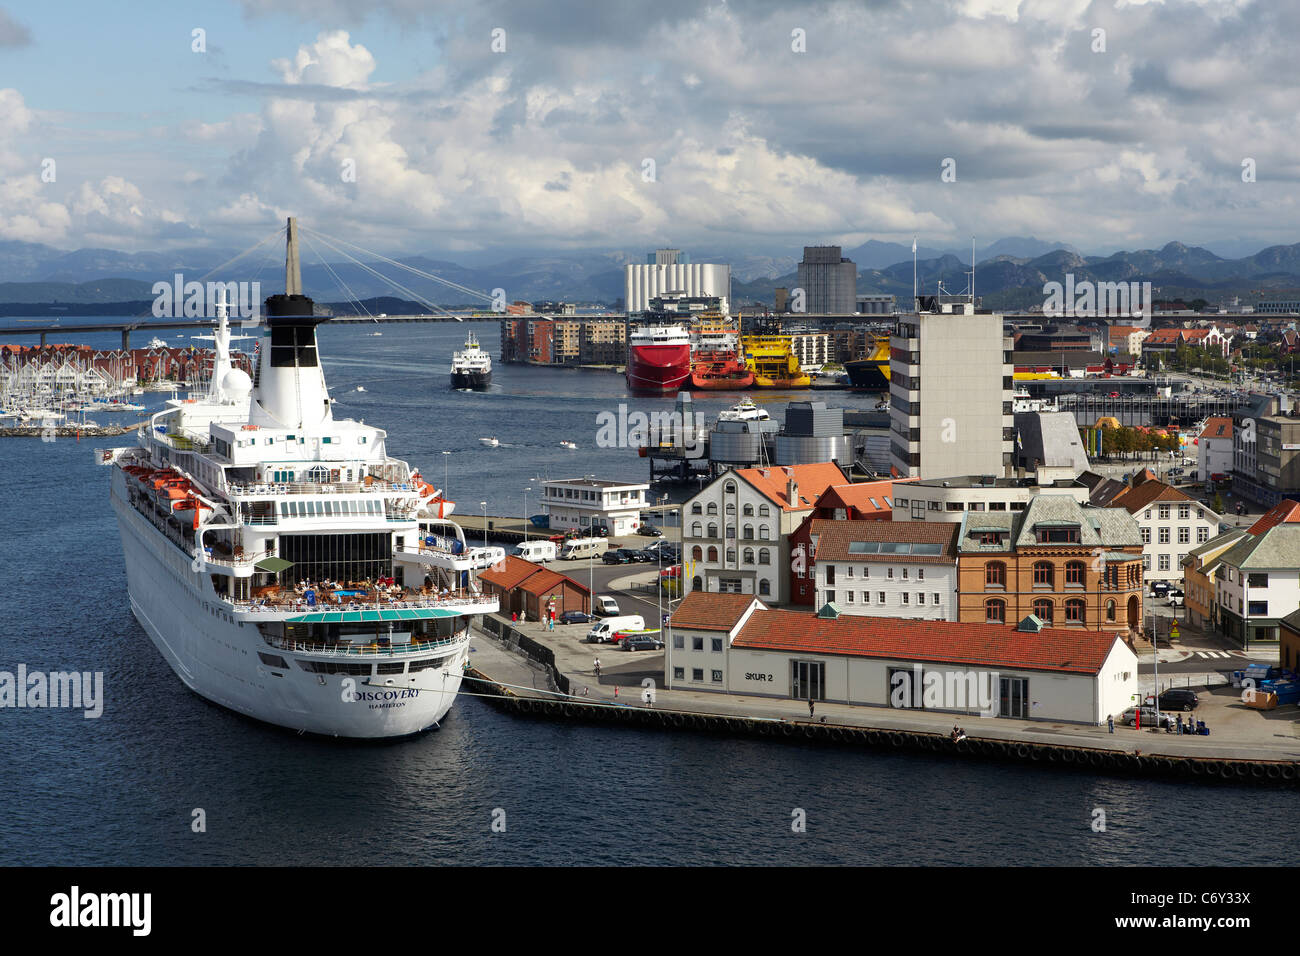 The cruise ship Discovery, moored at the Port of Stavanger, Norway, with anchor handling tugs in the background. Stock Photo